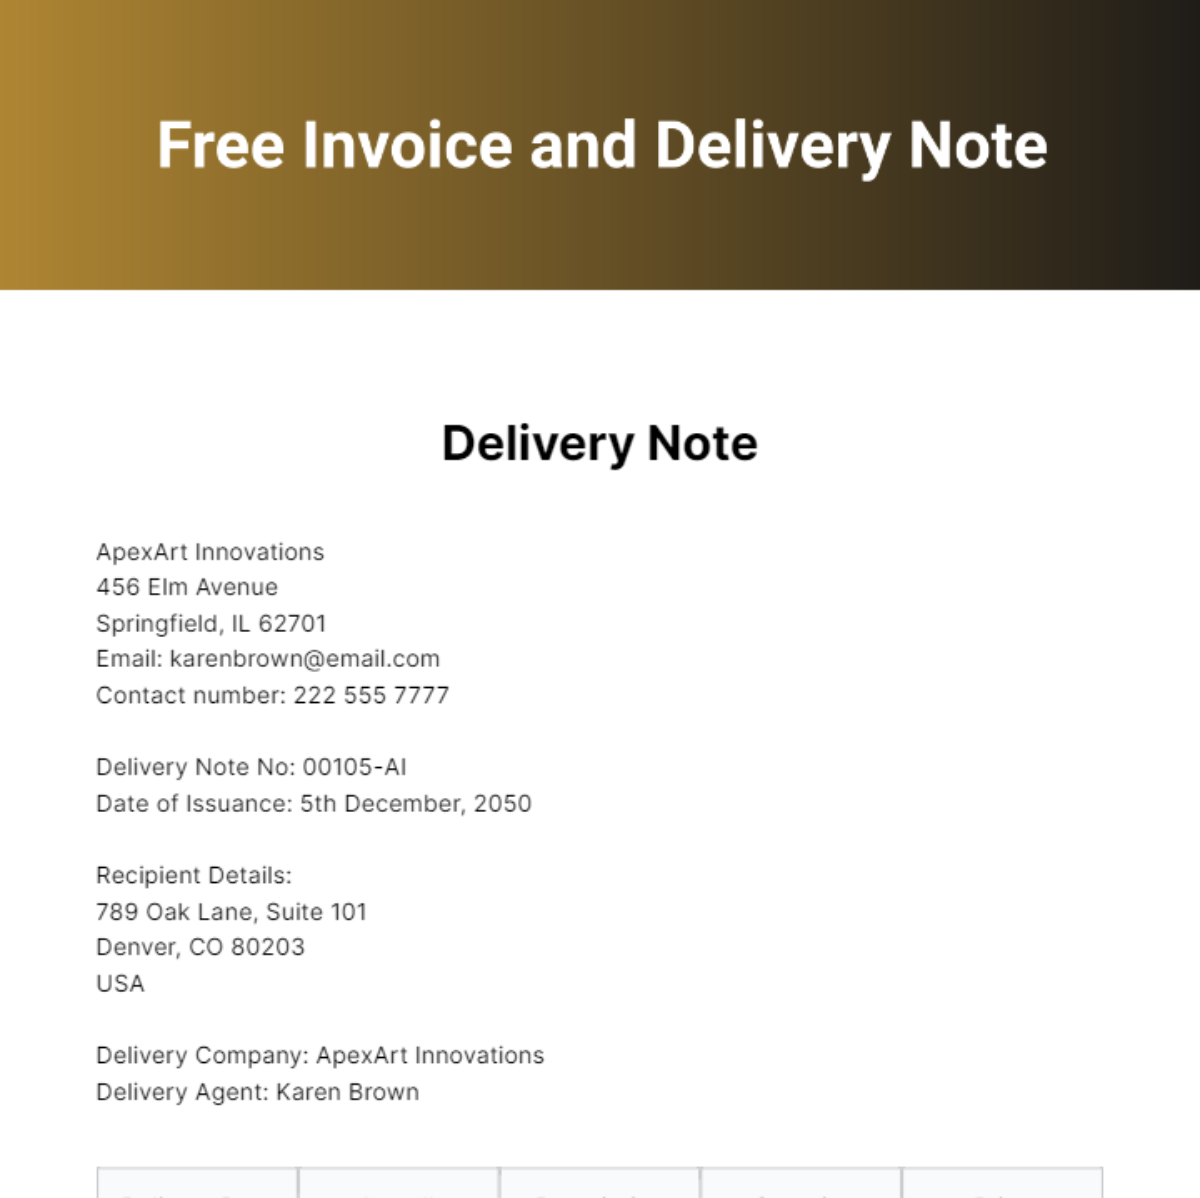 Free Invoice and Delivery Note Template